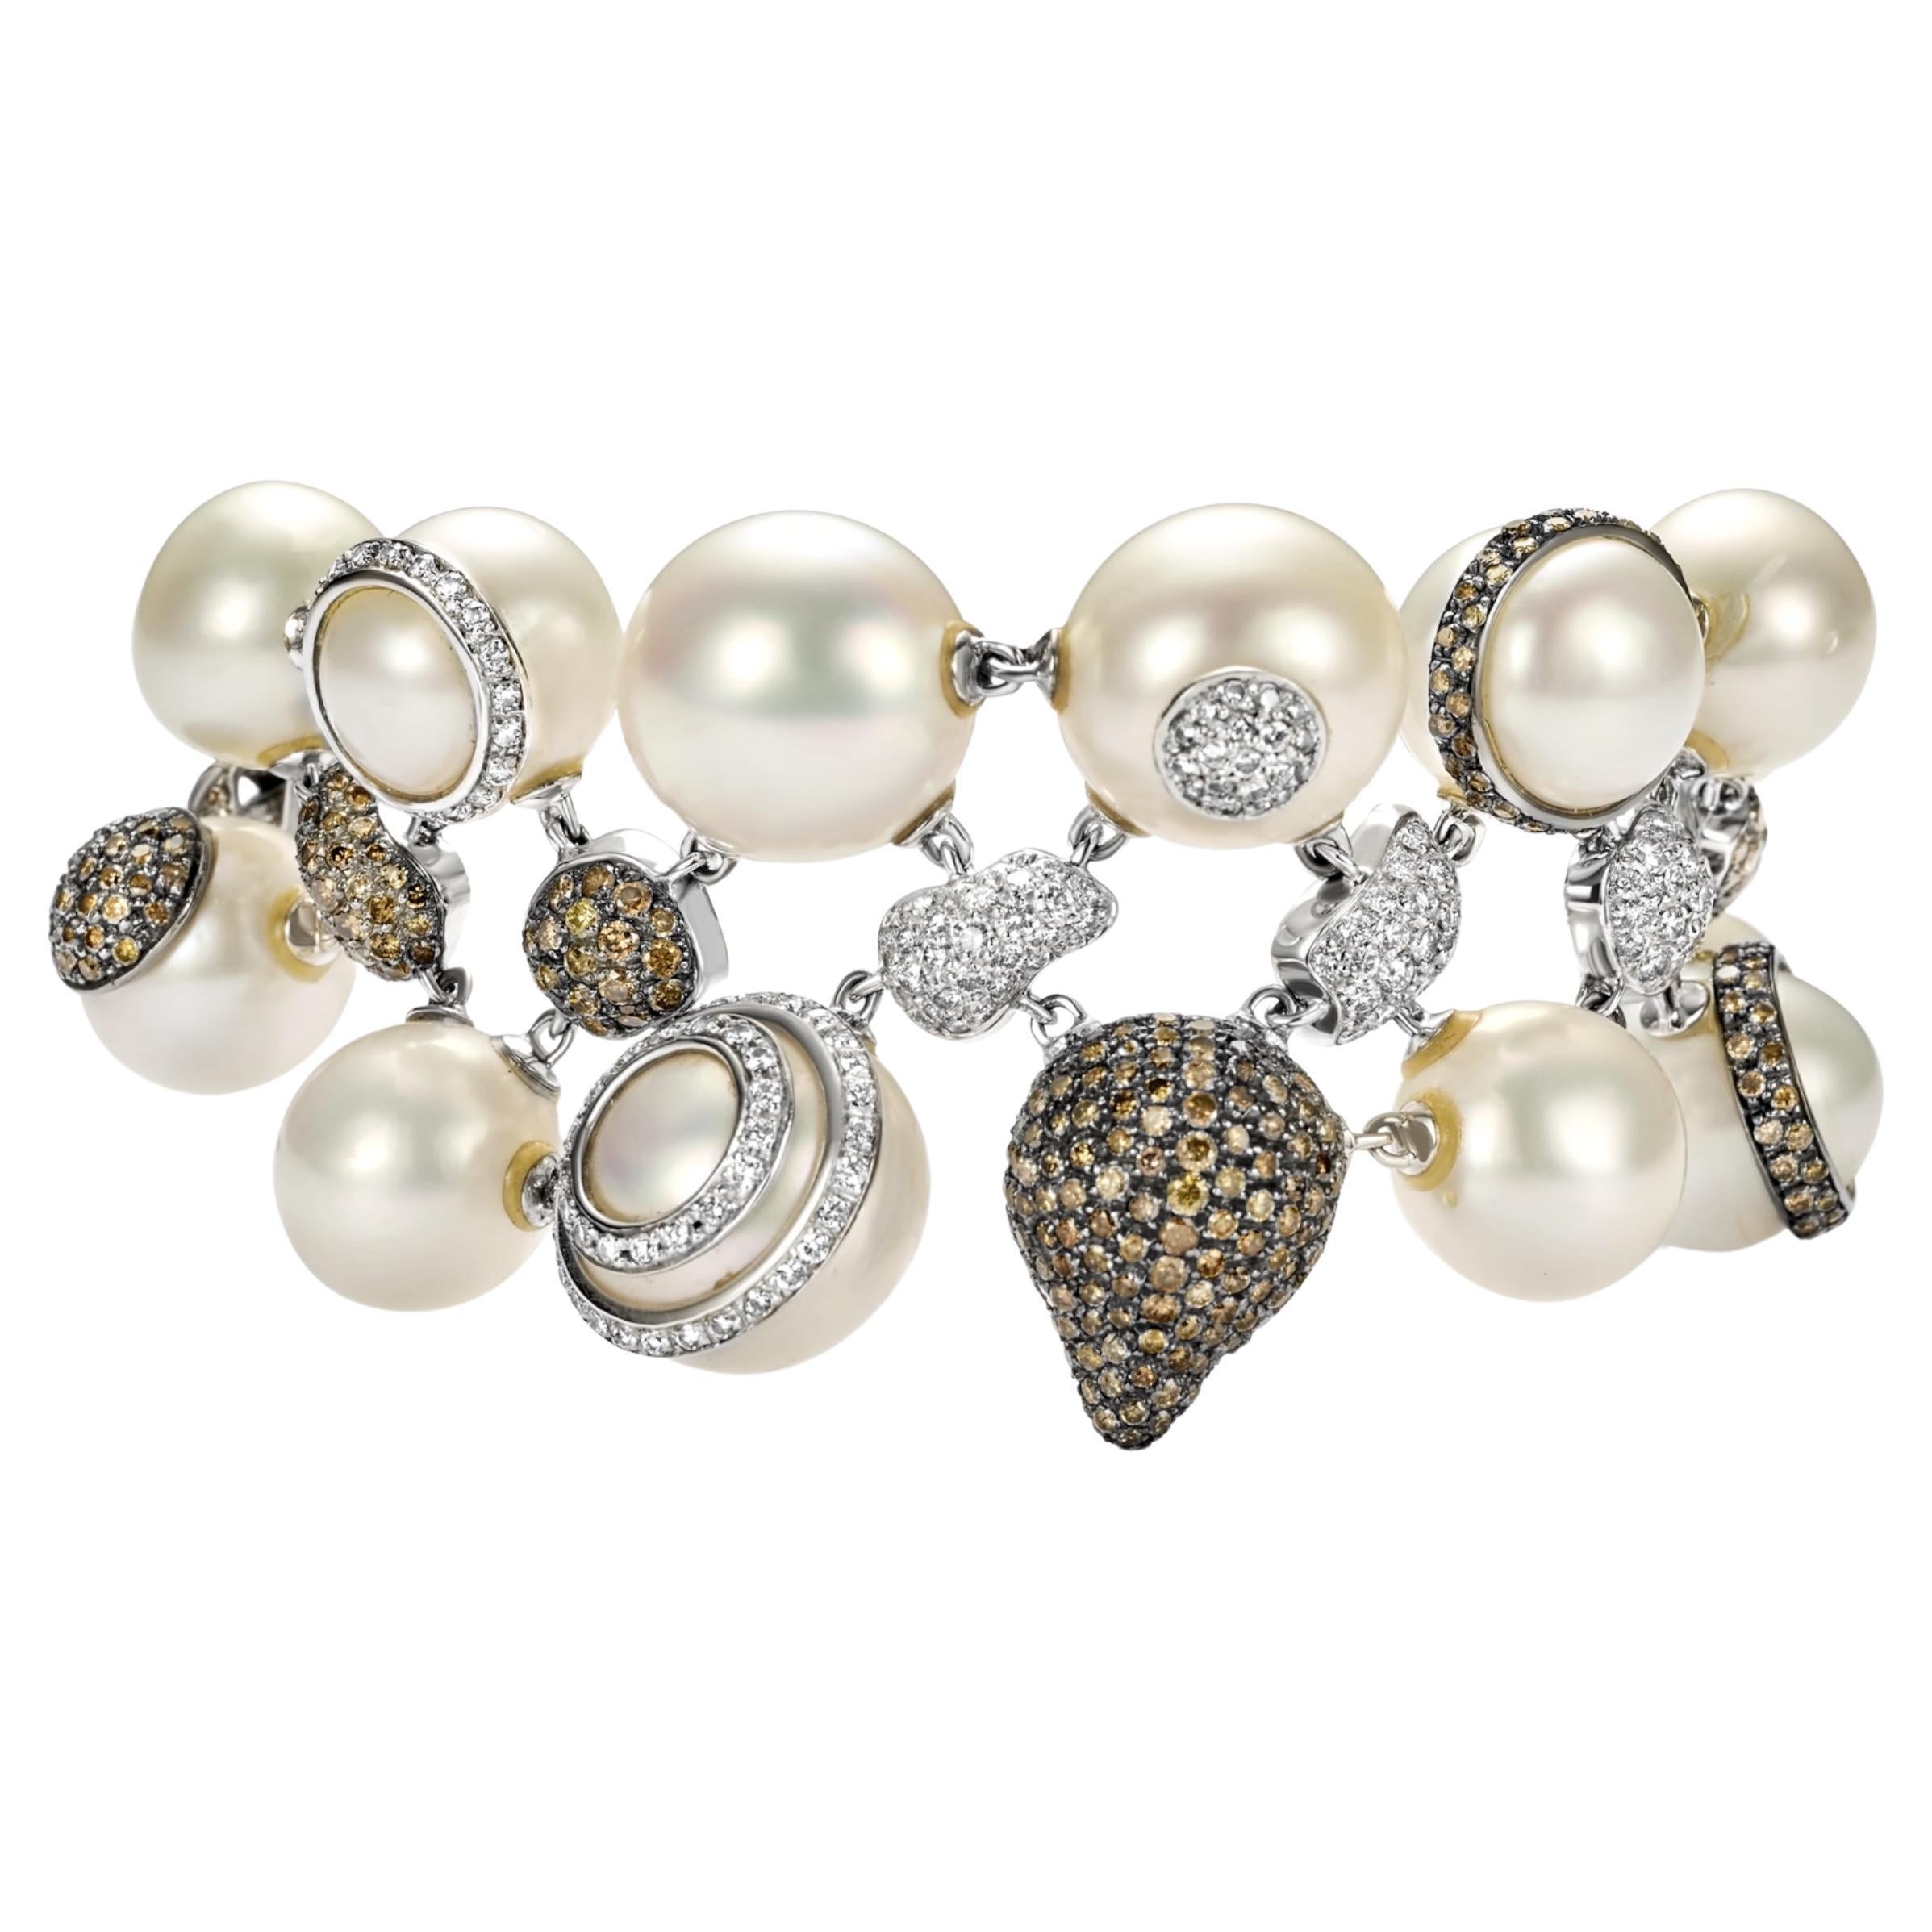 18kt White Gold Bracelet 12.6ct White & Cognac Diamonds Pearl Has Matching Ring For Sale